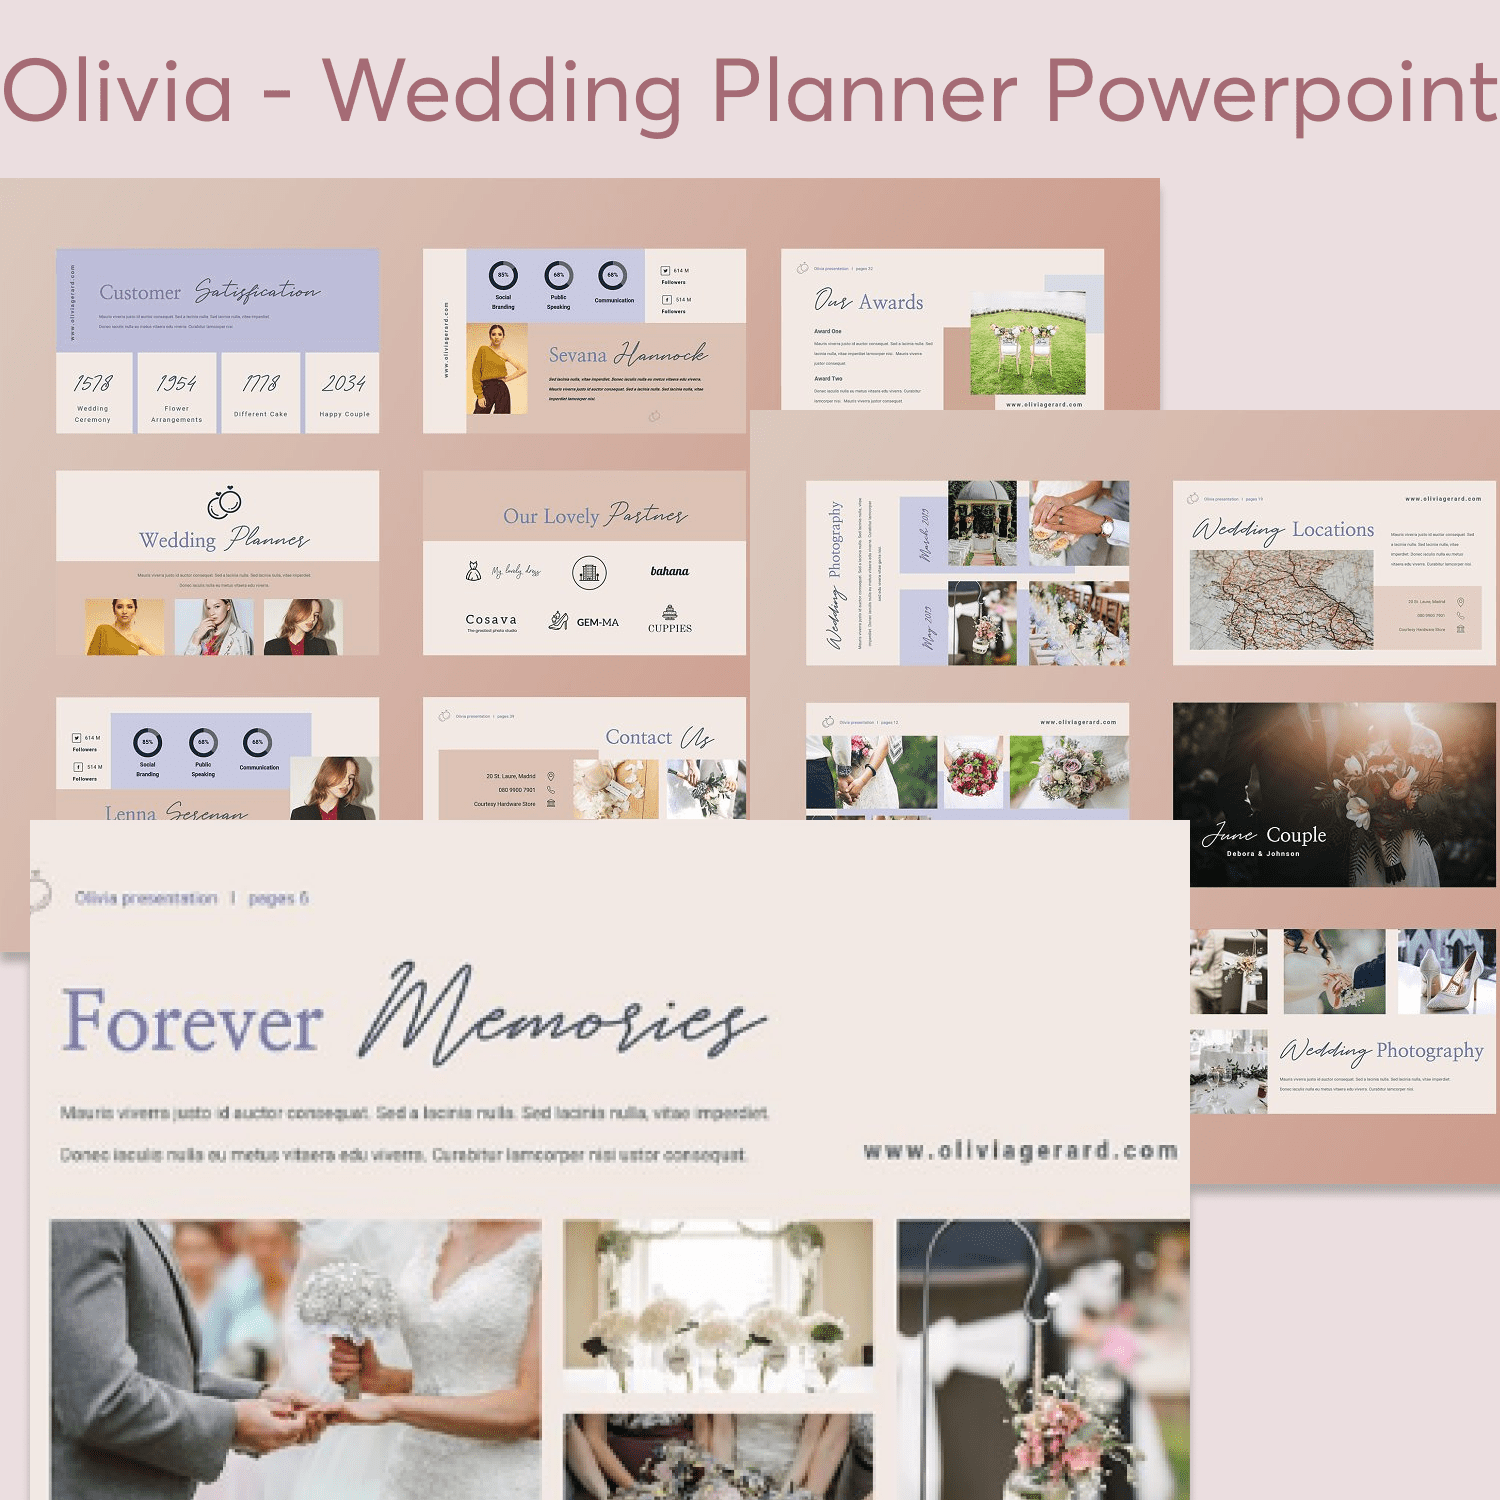 Olivia - Wedding Planner Powerpoint cover.